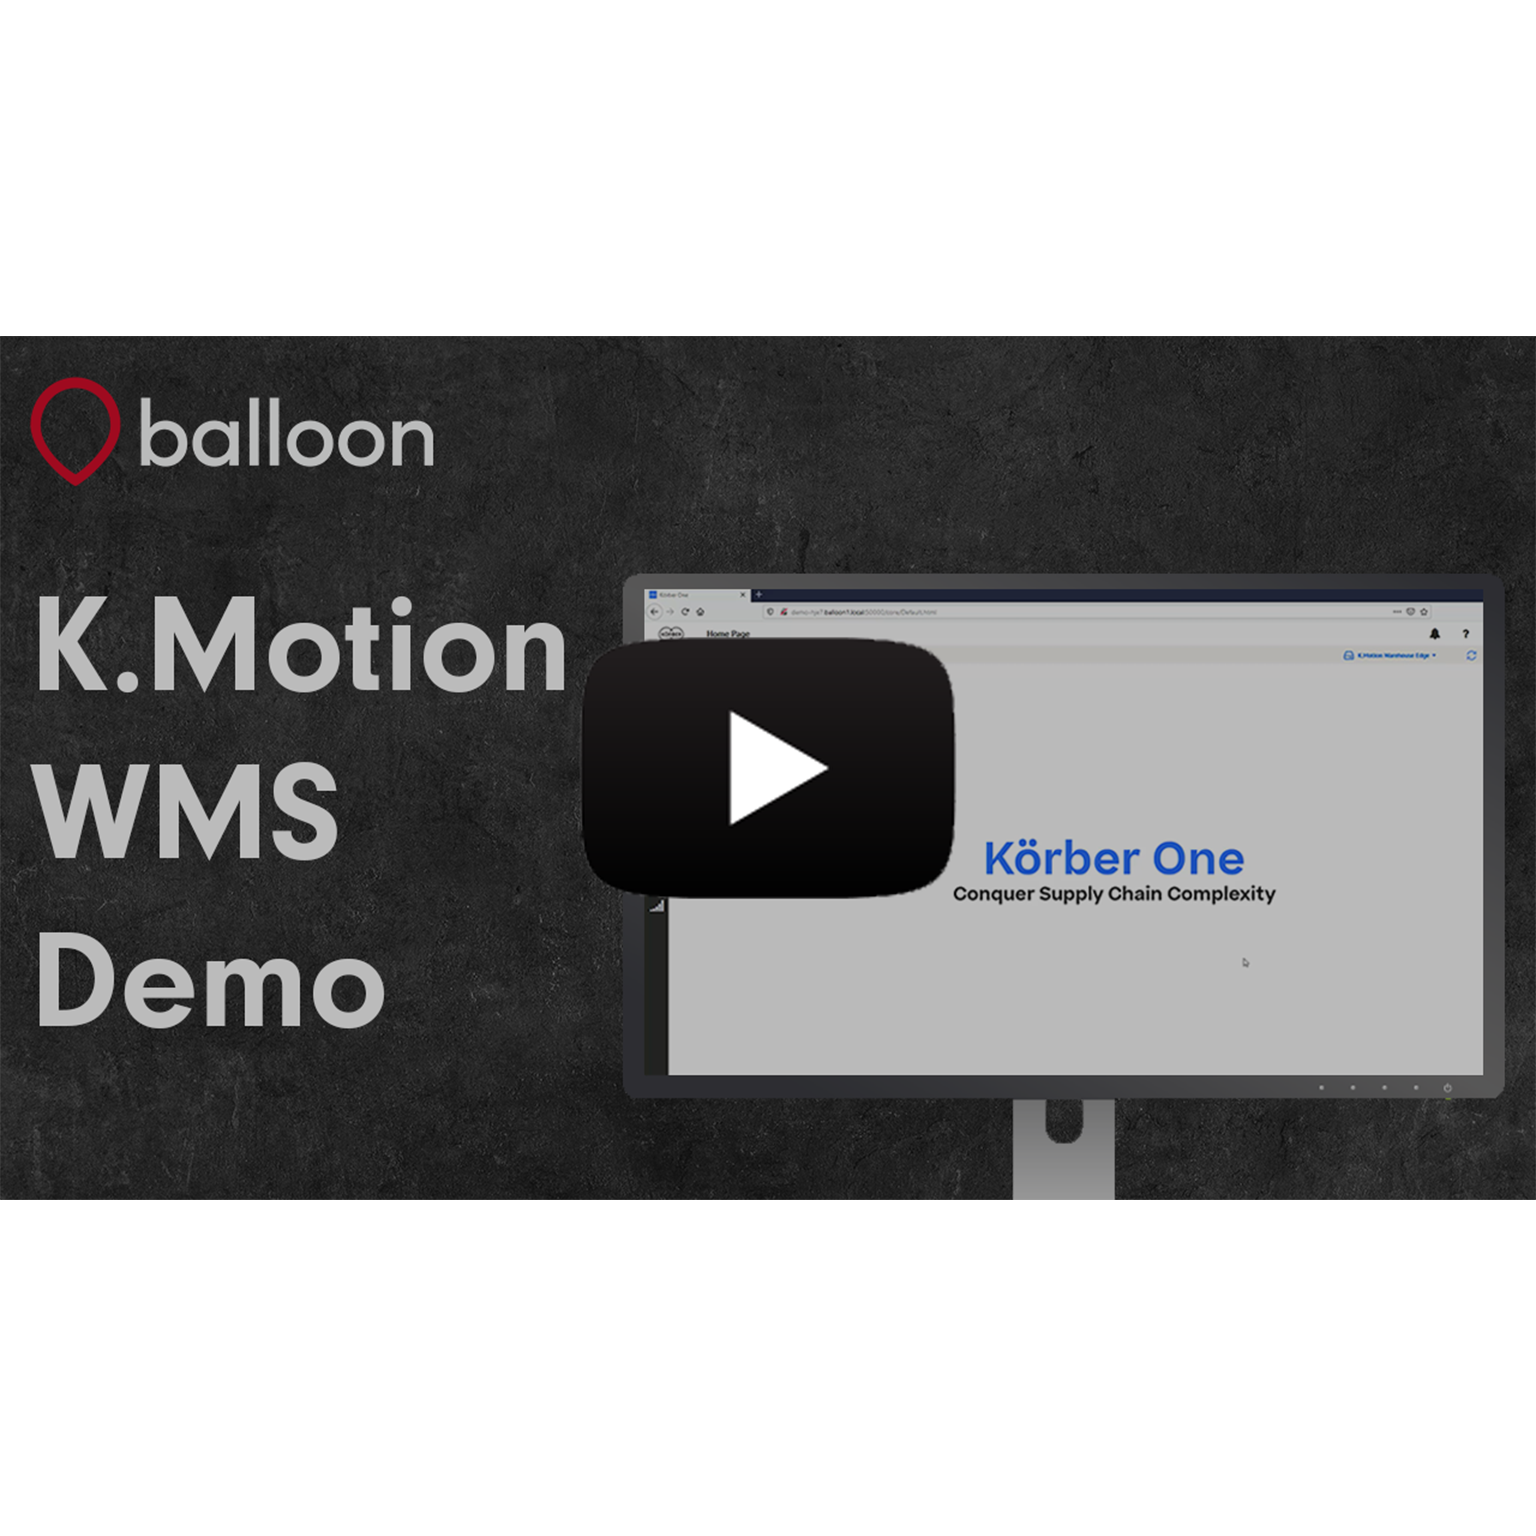 K.motion WMS demo- play button